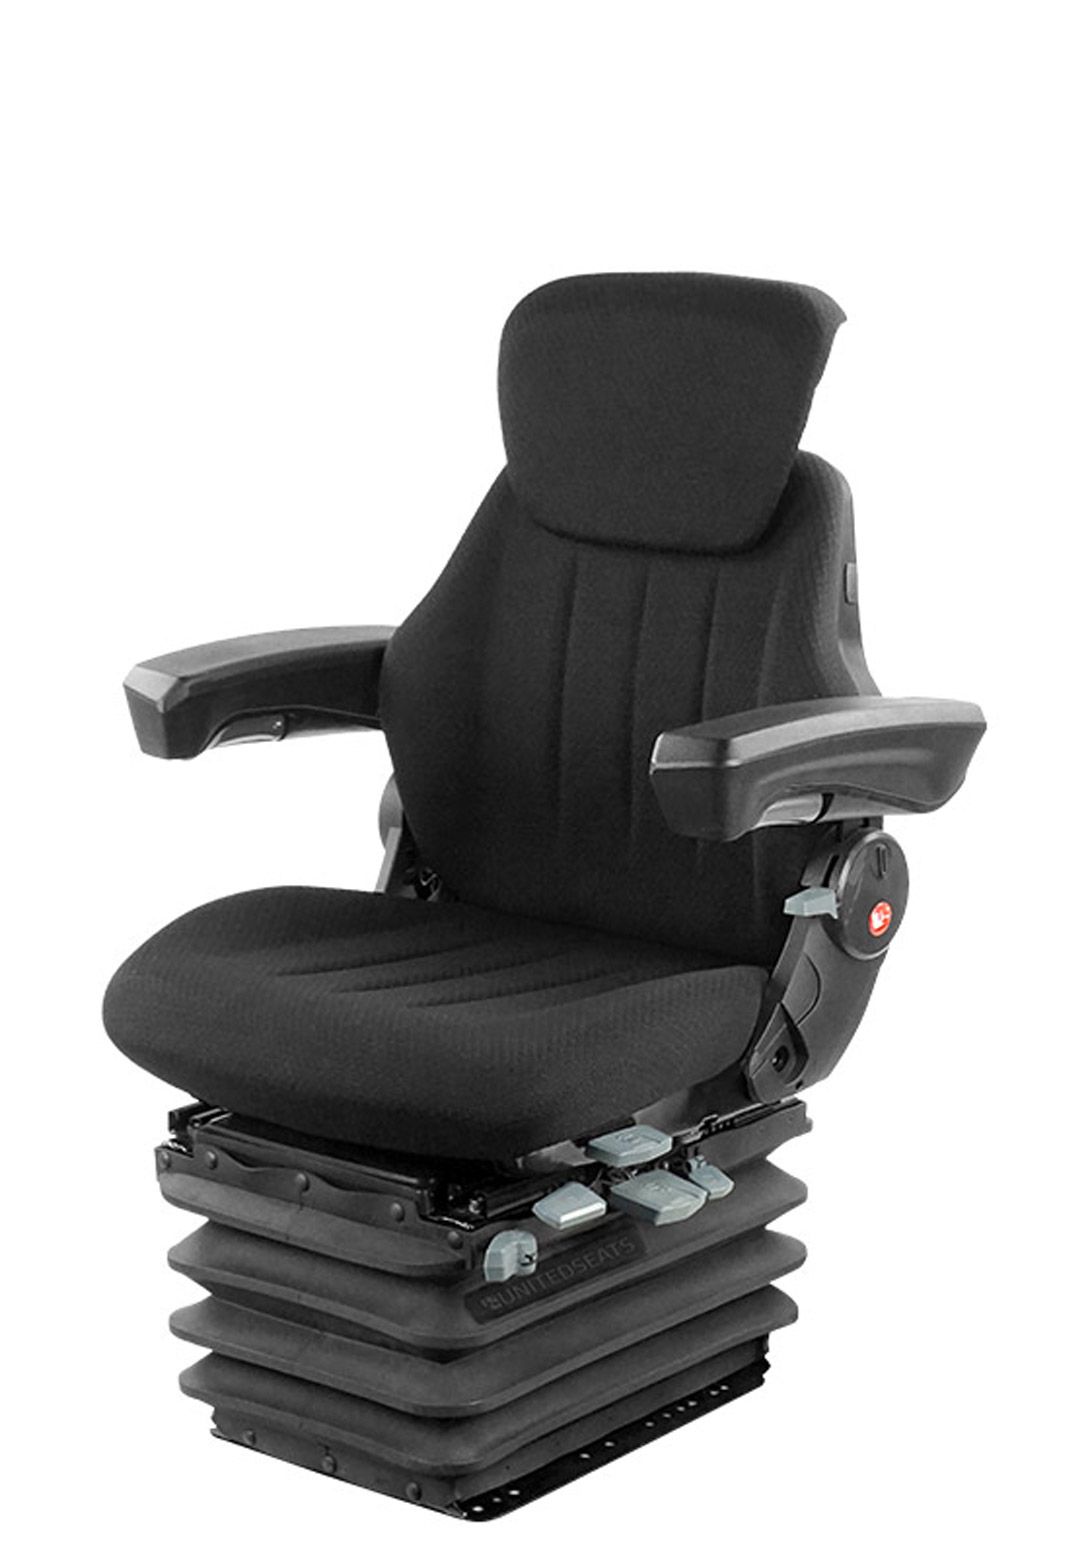 TEK Seating - protecting drivers by prioritising comfort and safety